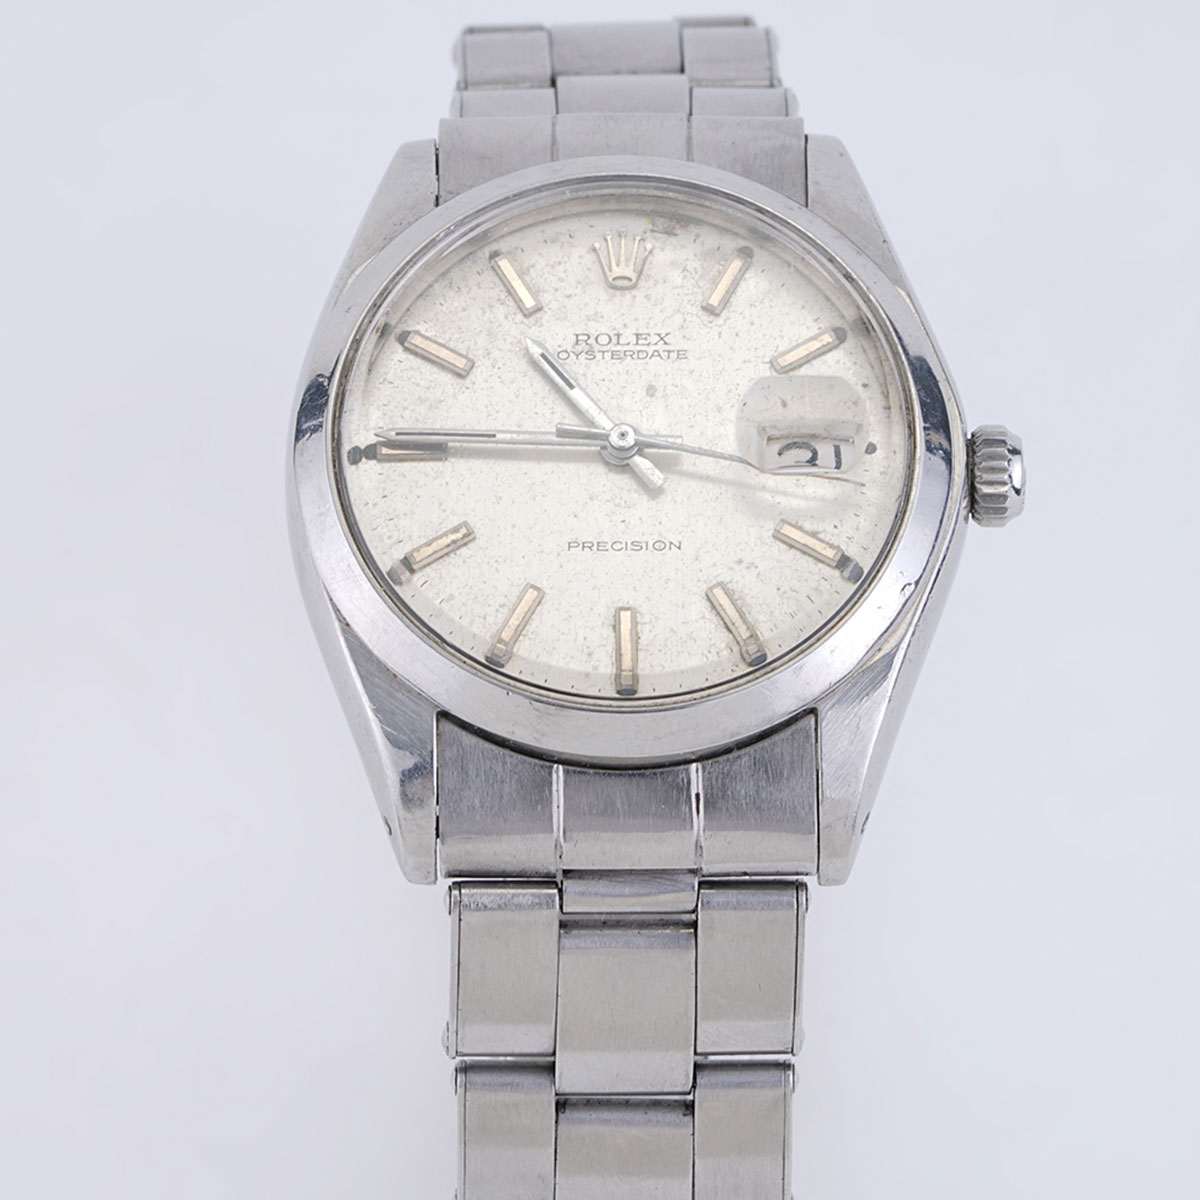 Rolex Oyster Date 34mm 6694 Circa 1970 | New York Jewelers Chicago